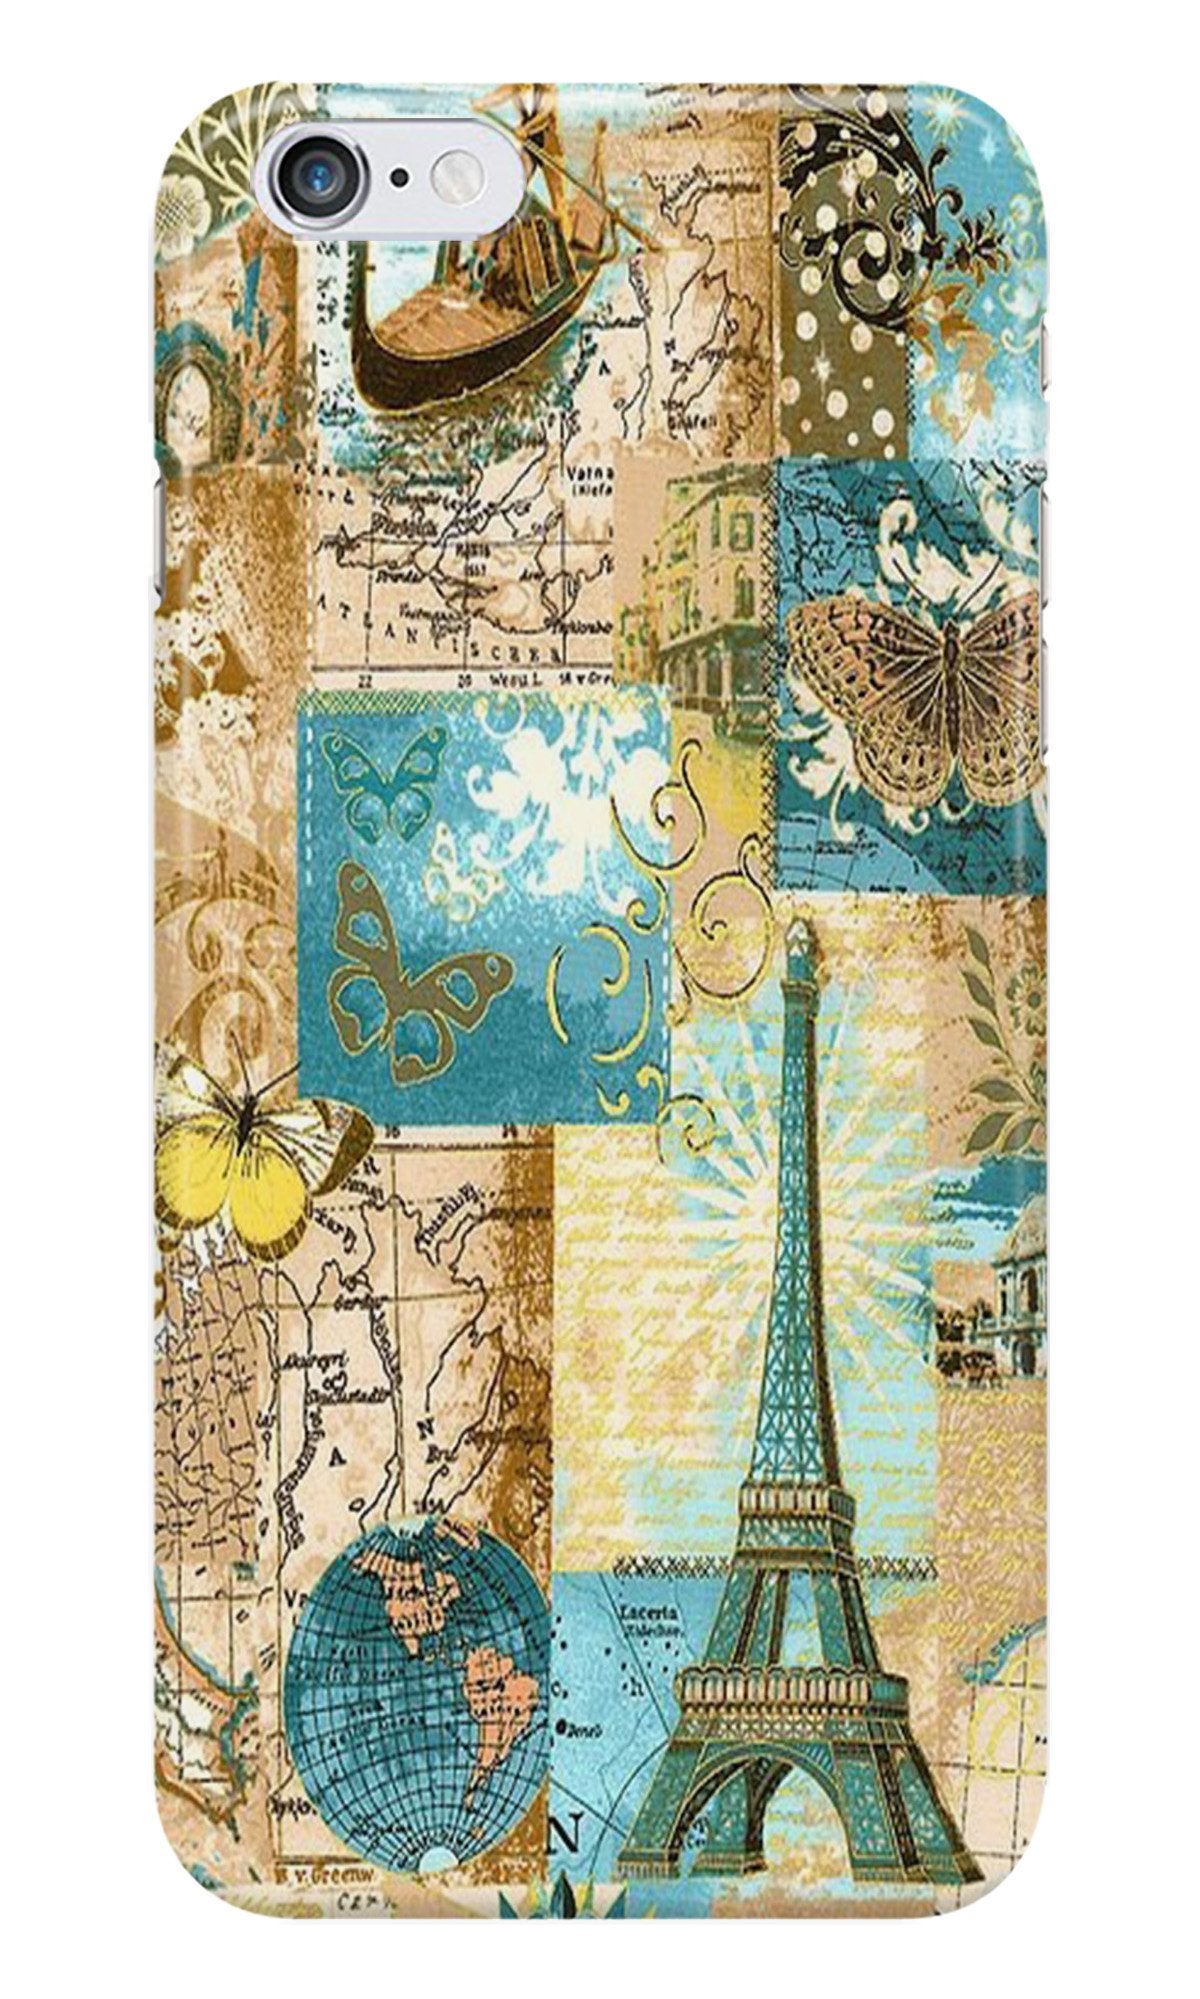 Travel Eiffel TowerCase for Iphone 6/6S (Design No. 206)